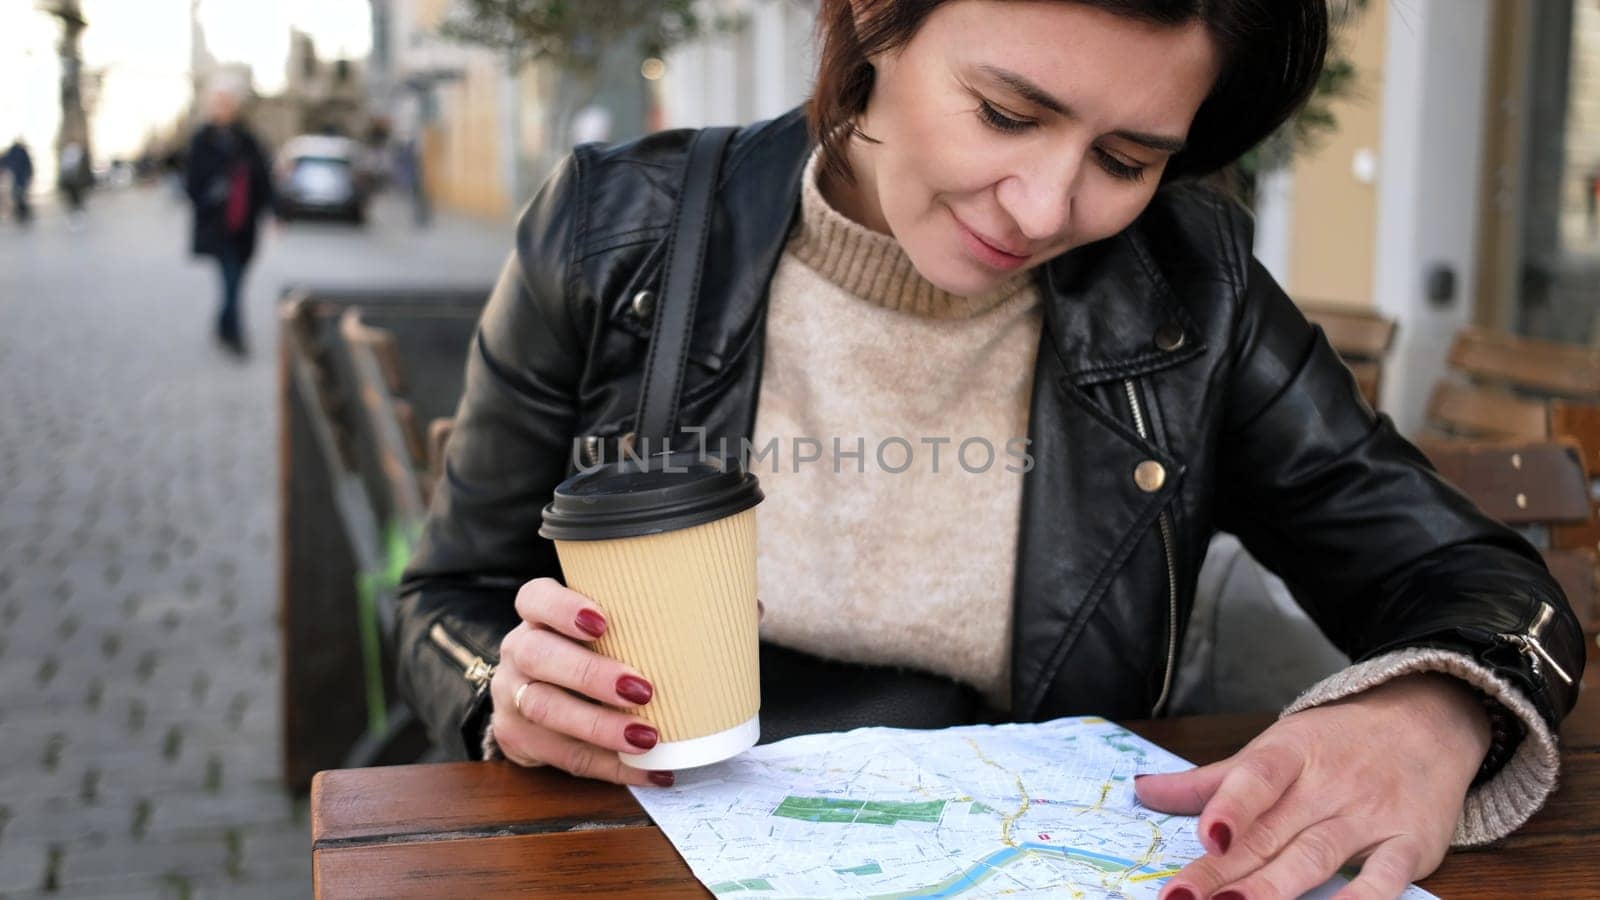 Stylish Female Tourist Checks City Sightseeing Route On Map by GekaSkr